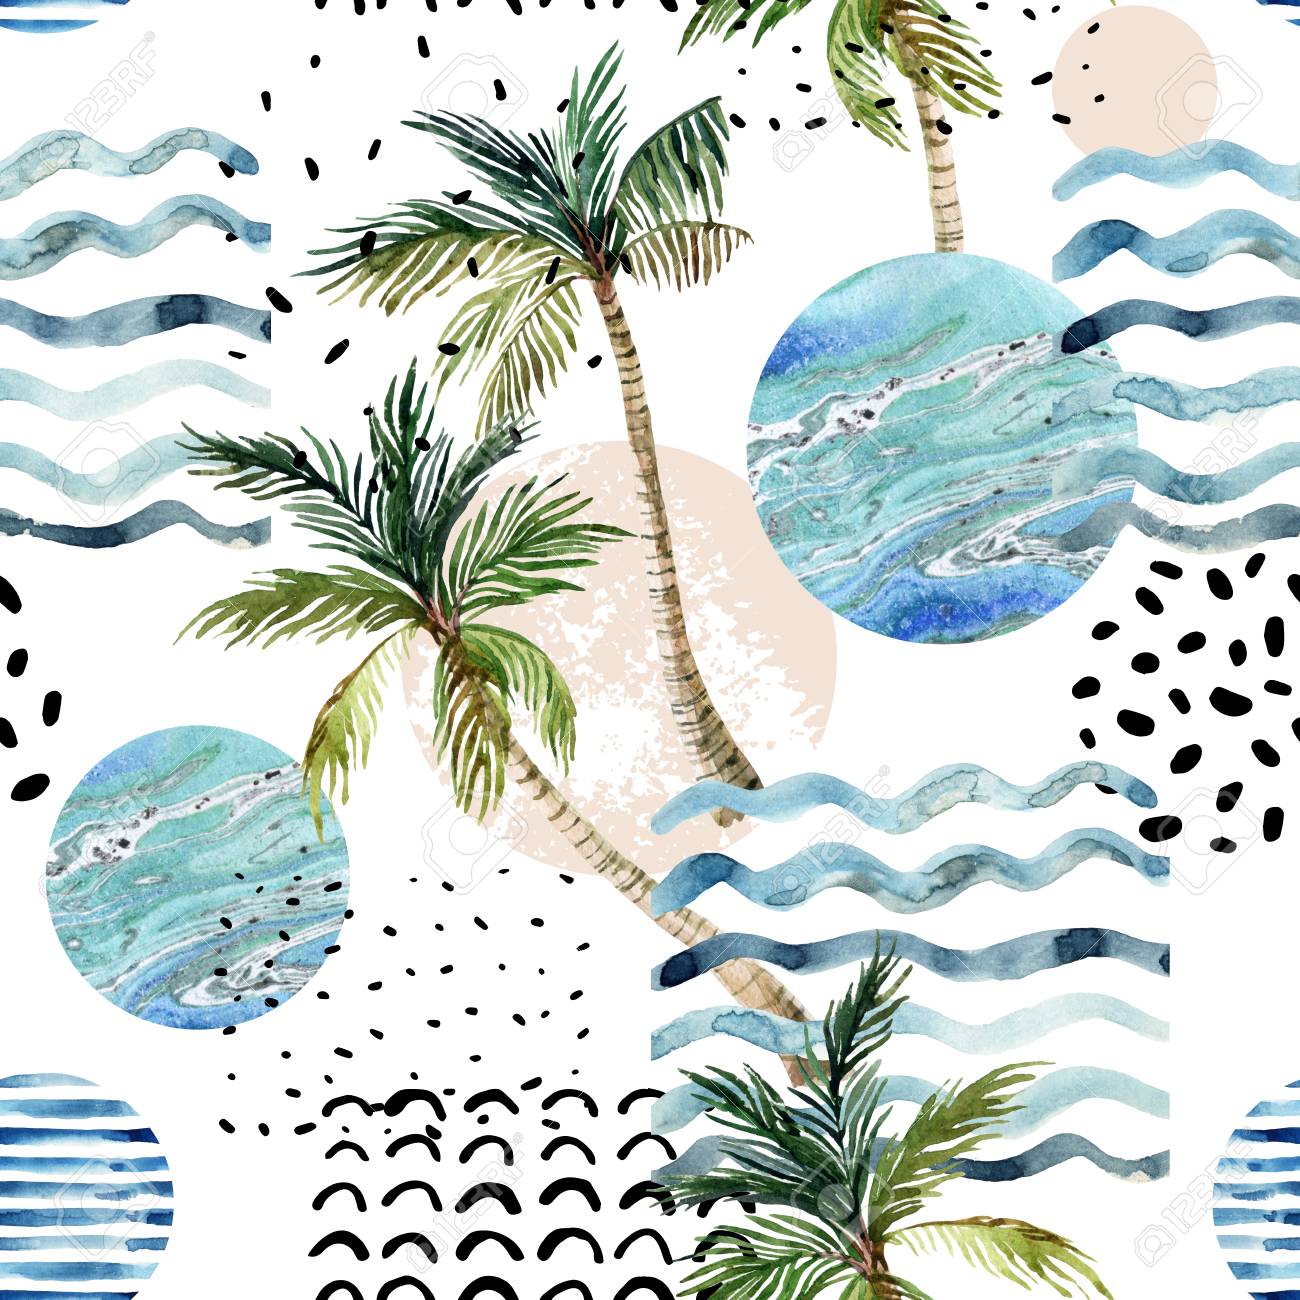 Abstract Summer Background Art Illustration With Palm Tree